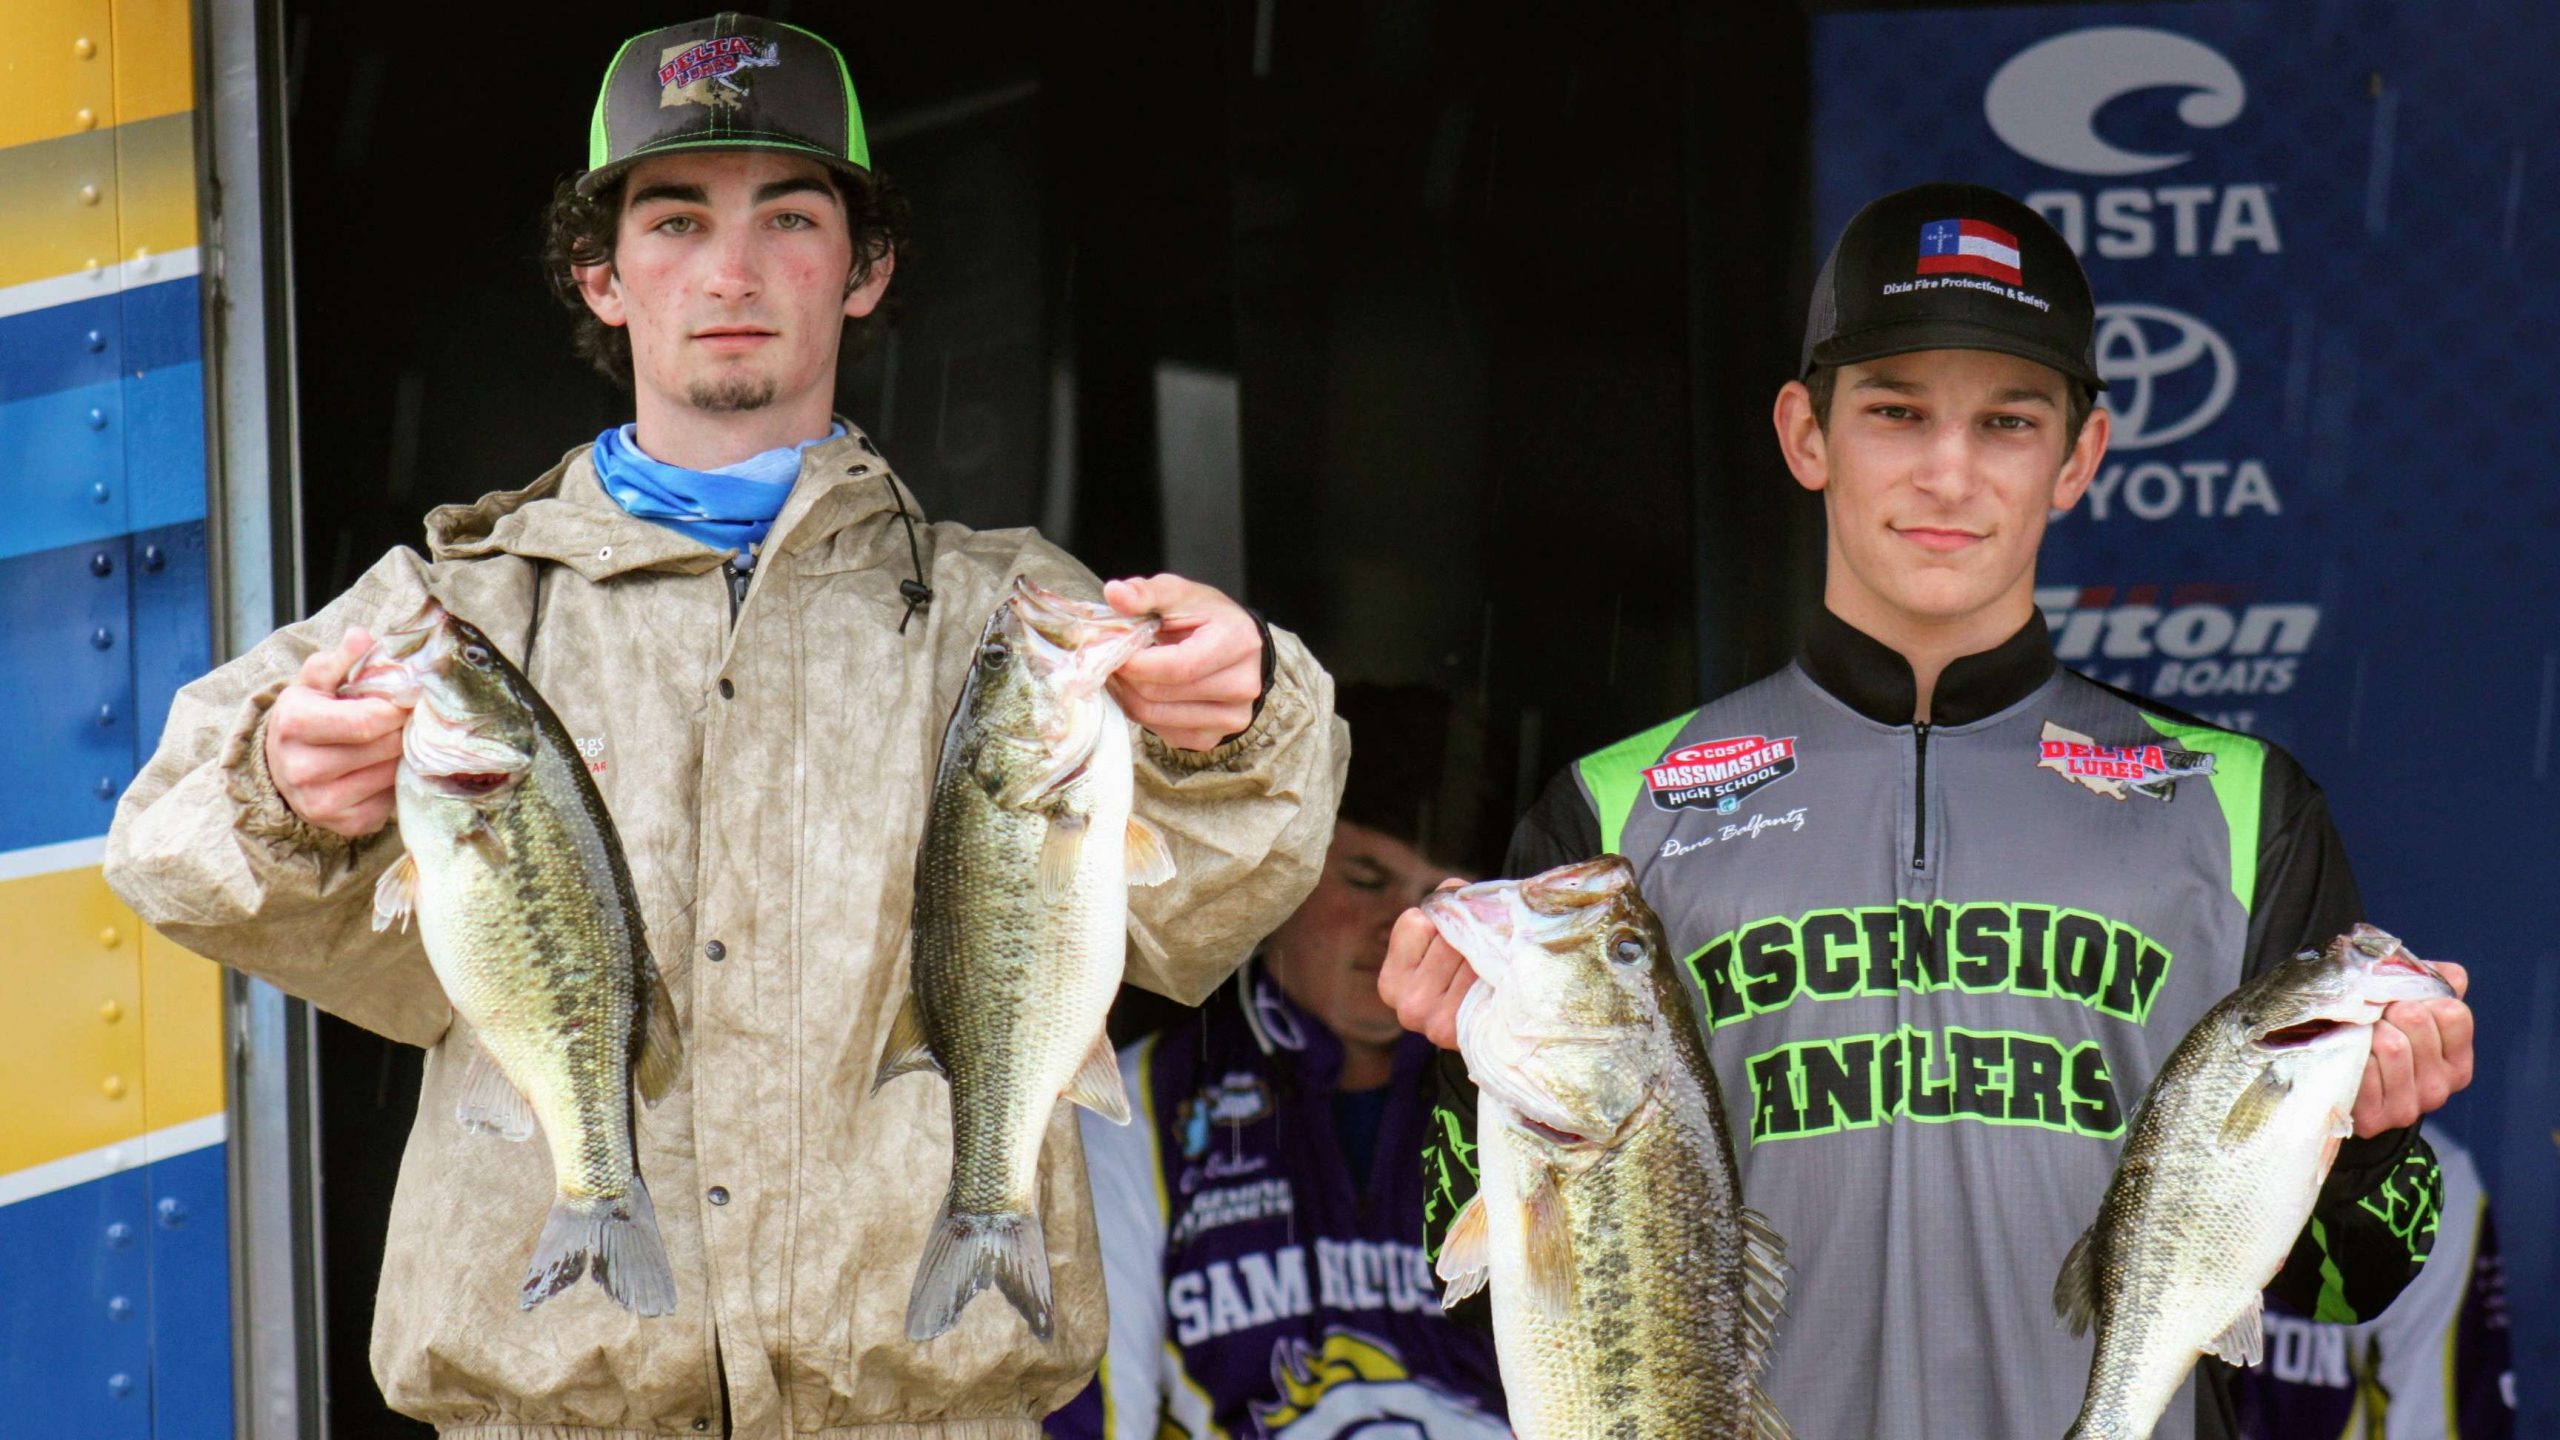 Caleb Mayers and Dane Balfantz of Louisiana-based Ascension Anglers
  finished in 15th place with 15-13.
